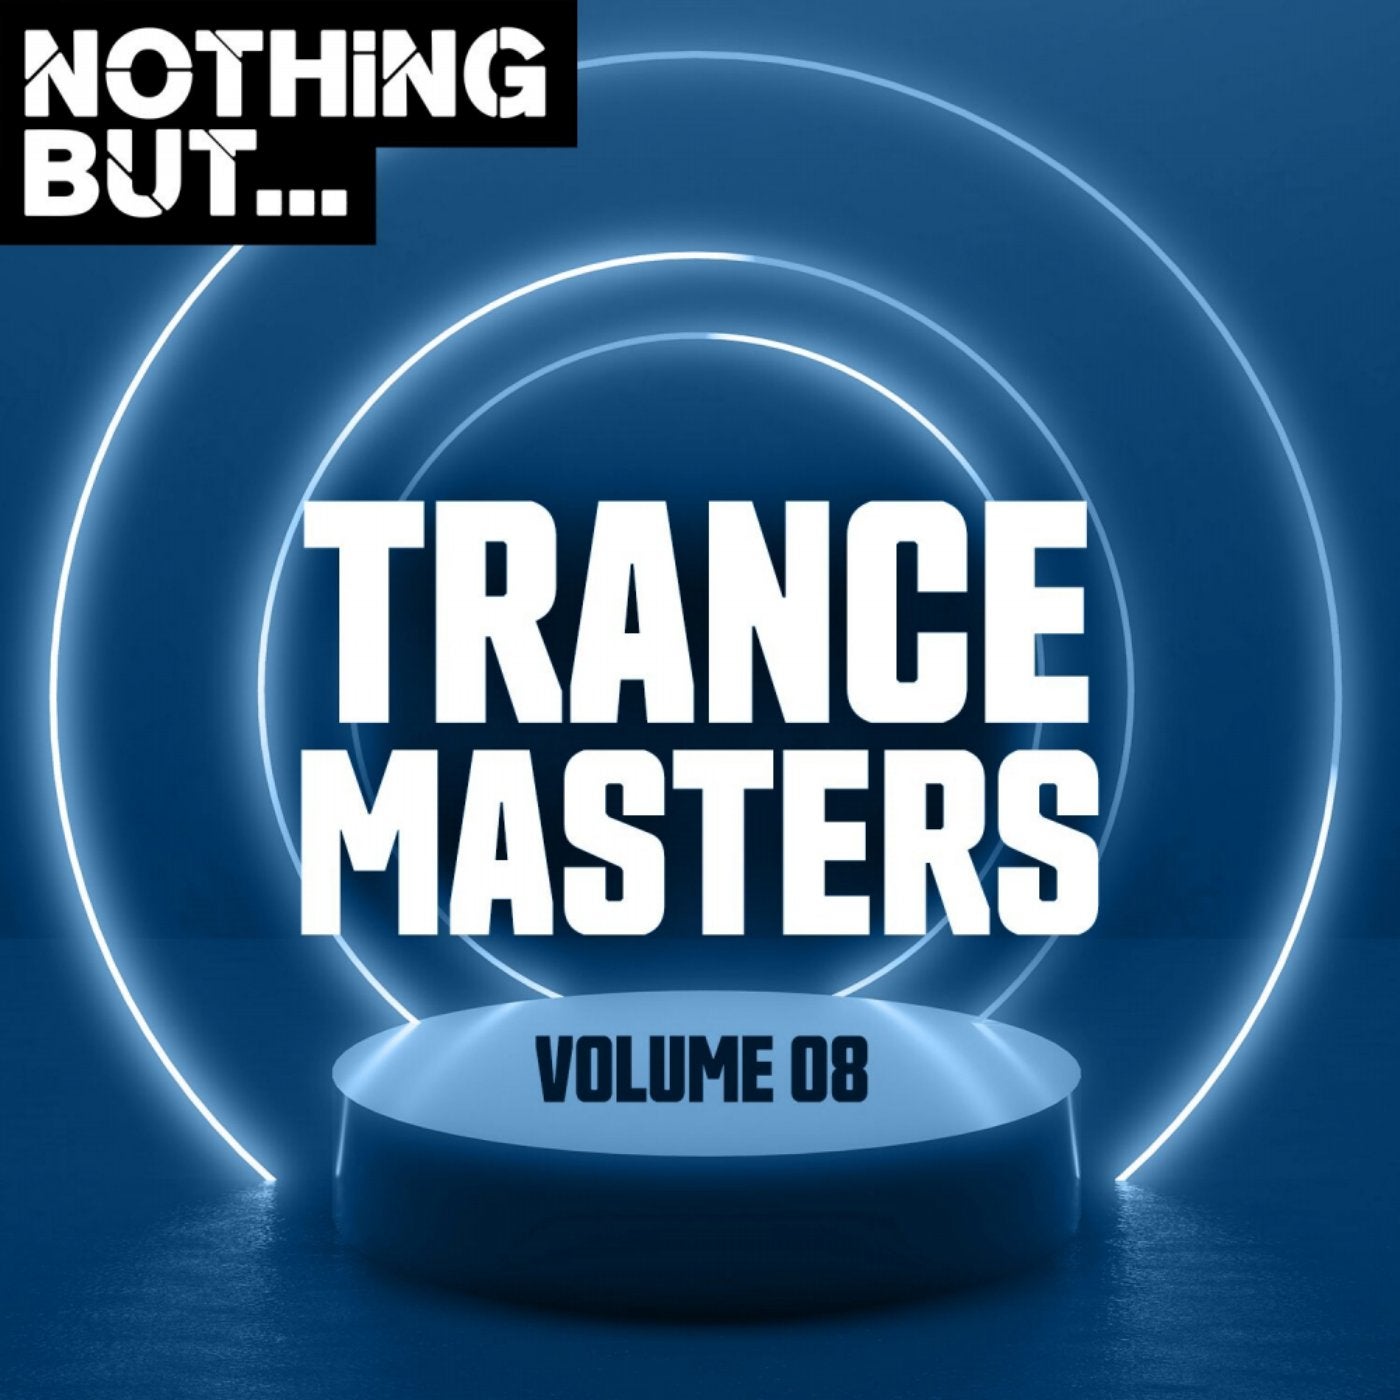 Nothing But... Trance Masters, Vol. 08